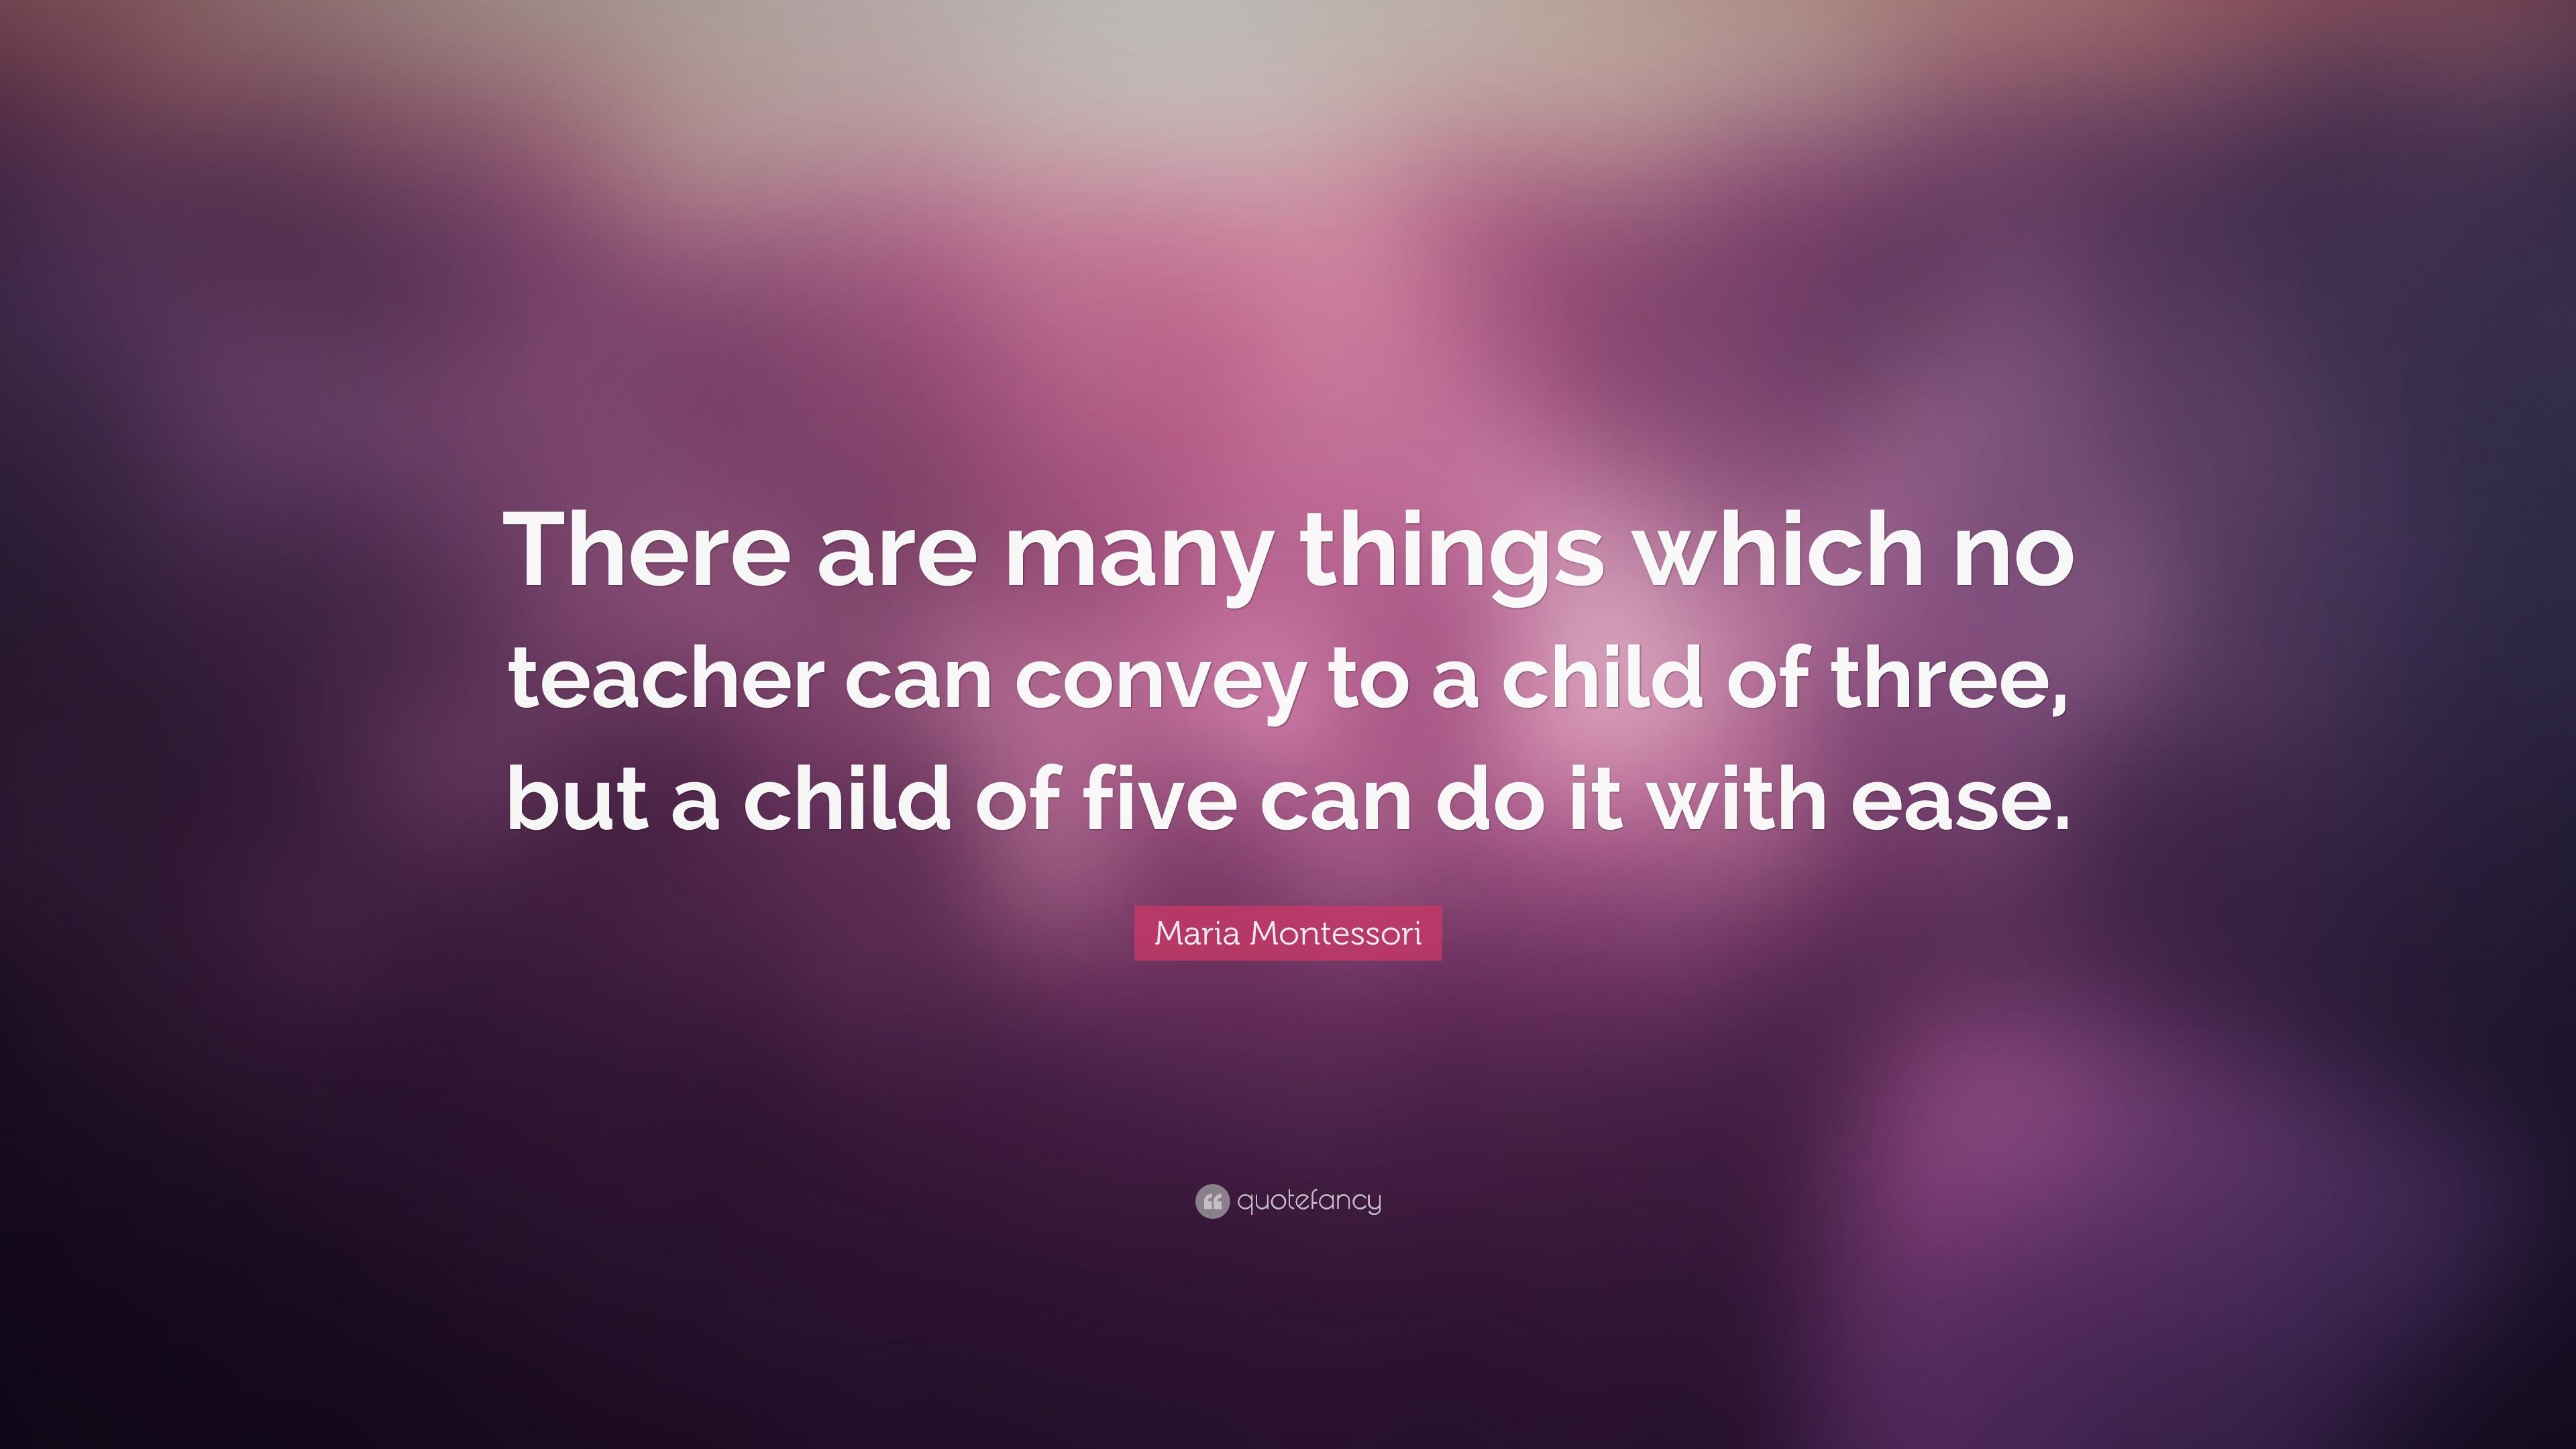 Maria Montessori Quote: “There are many things which no teacher can